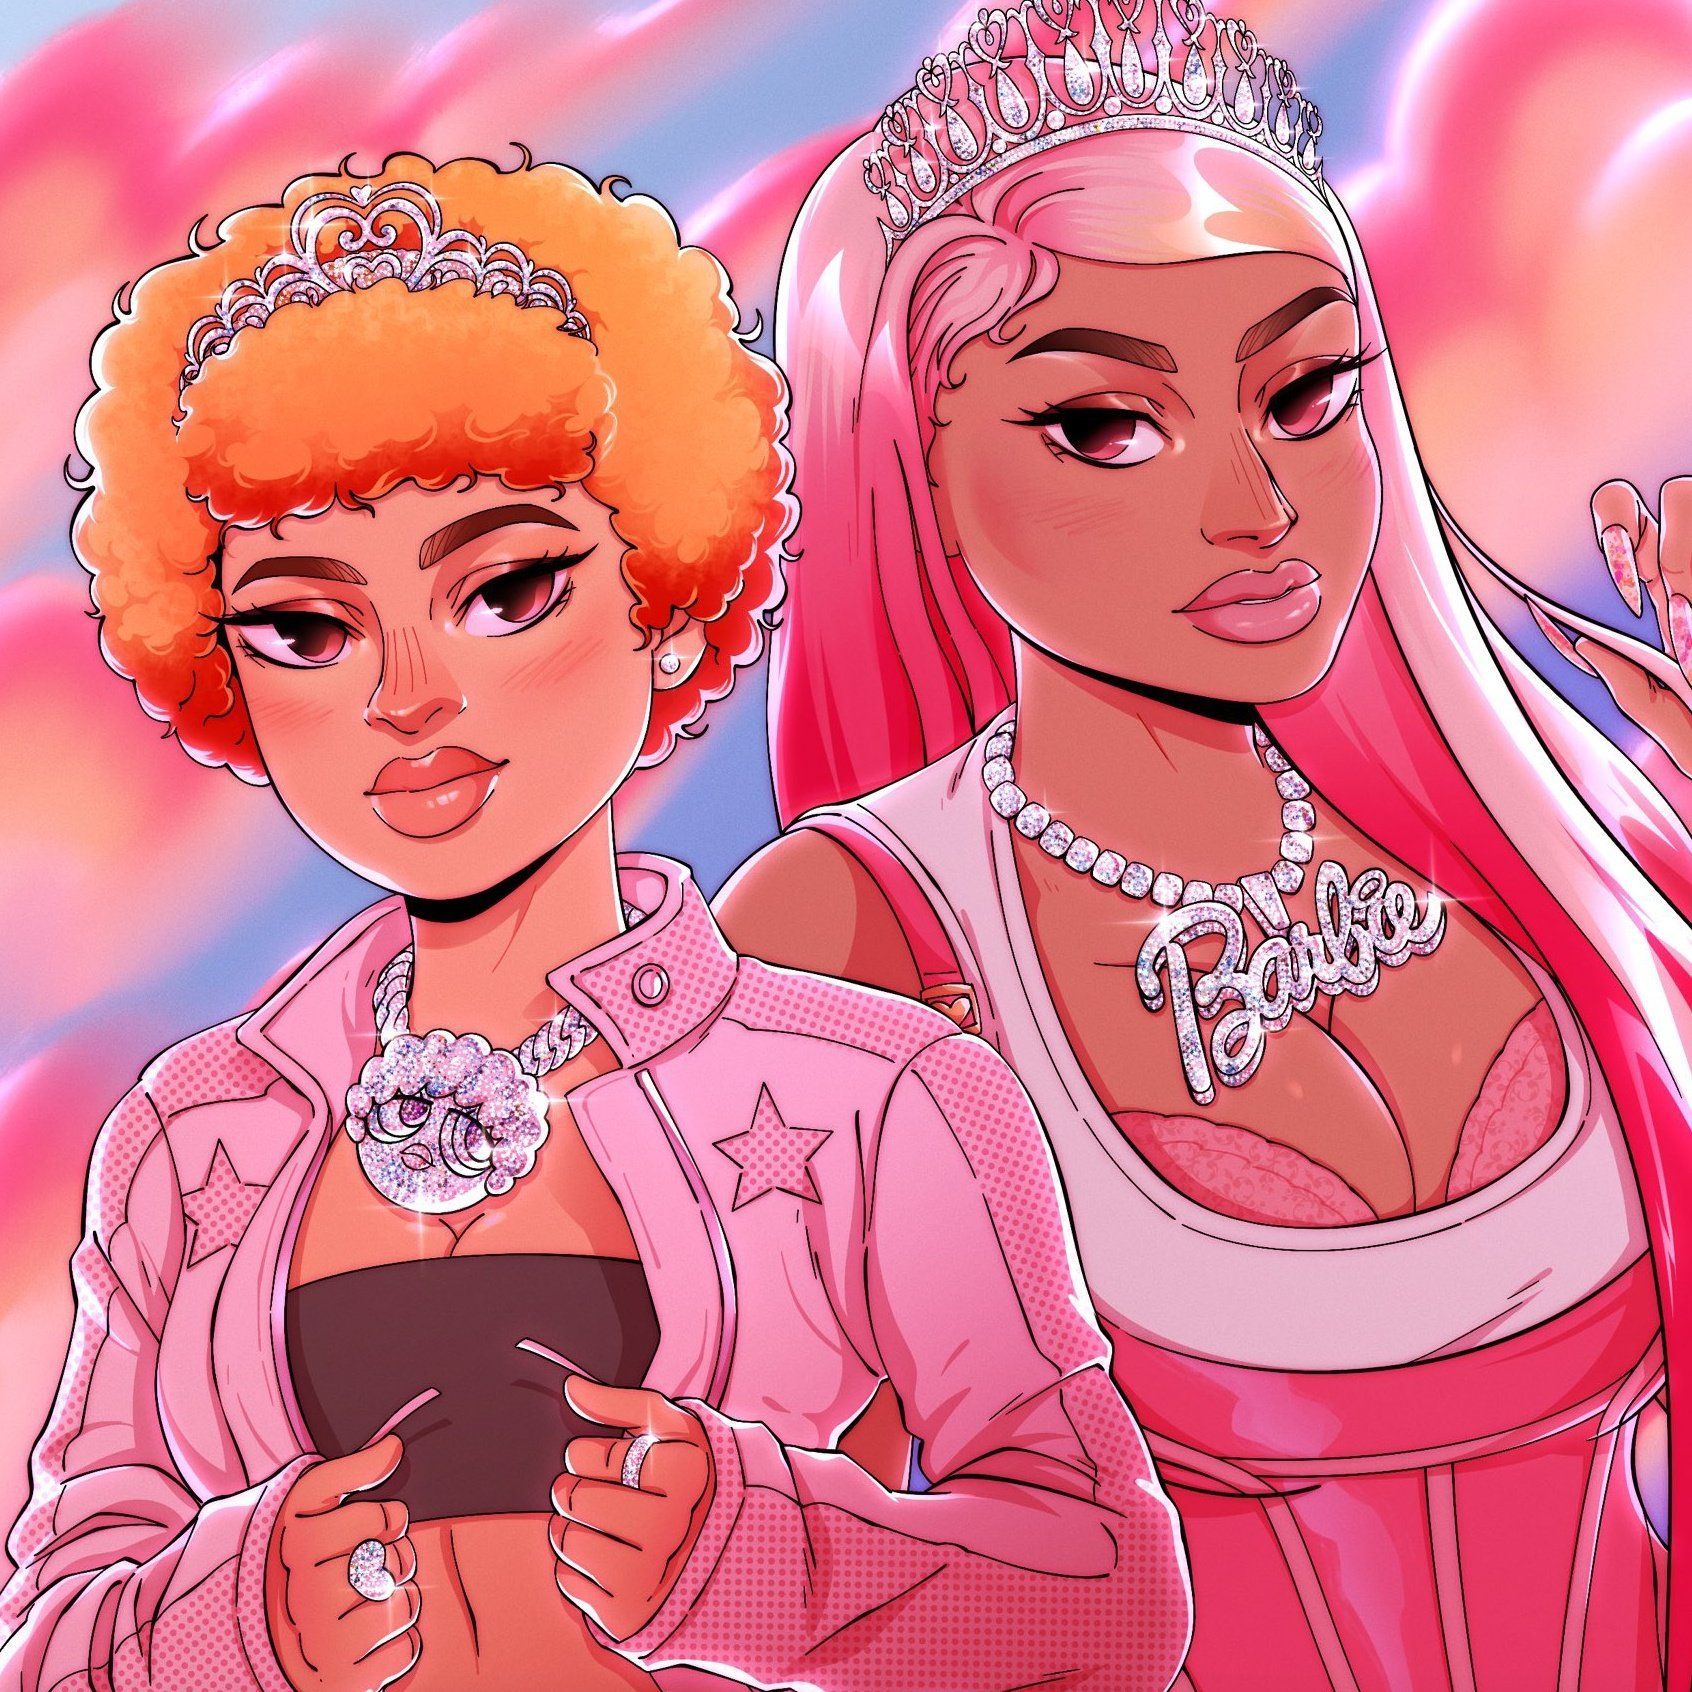 Two women with pink hair and crowns - Ice Spice